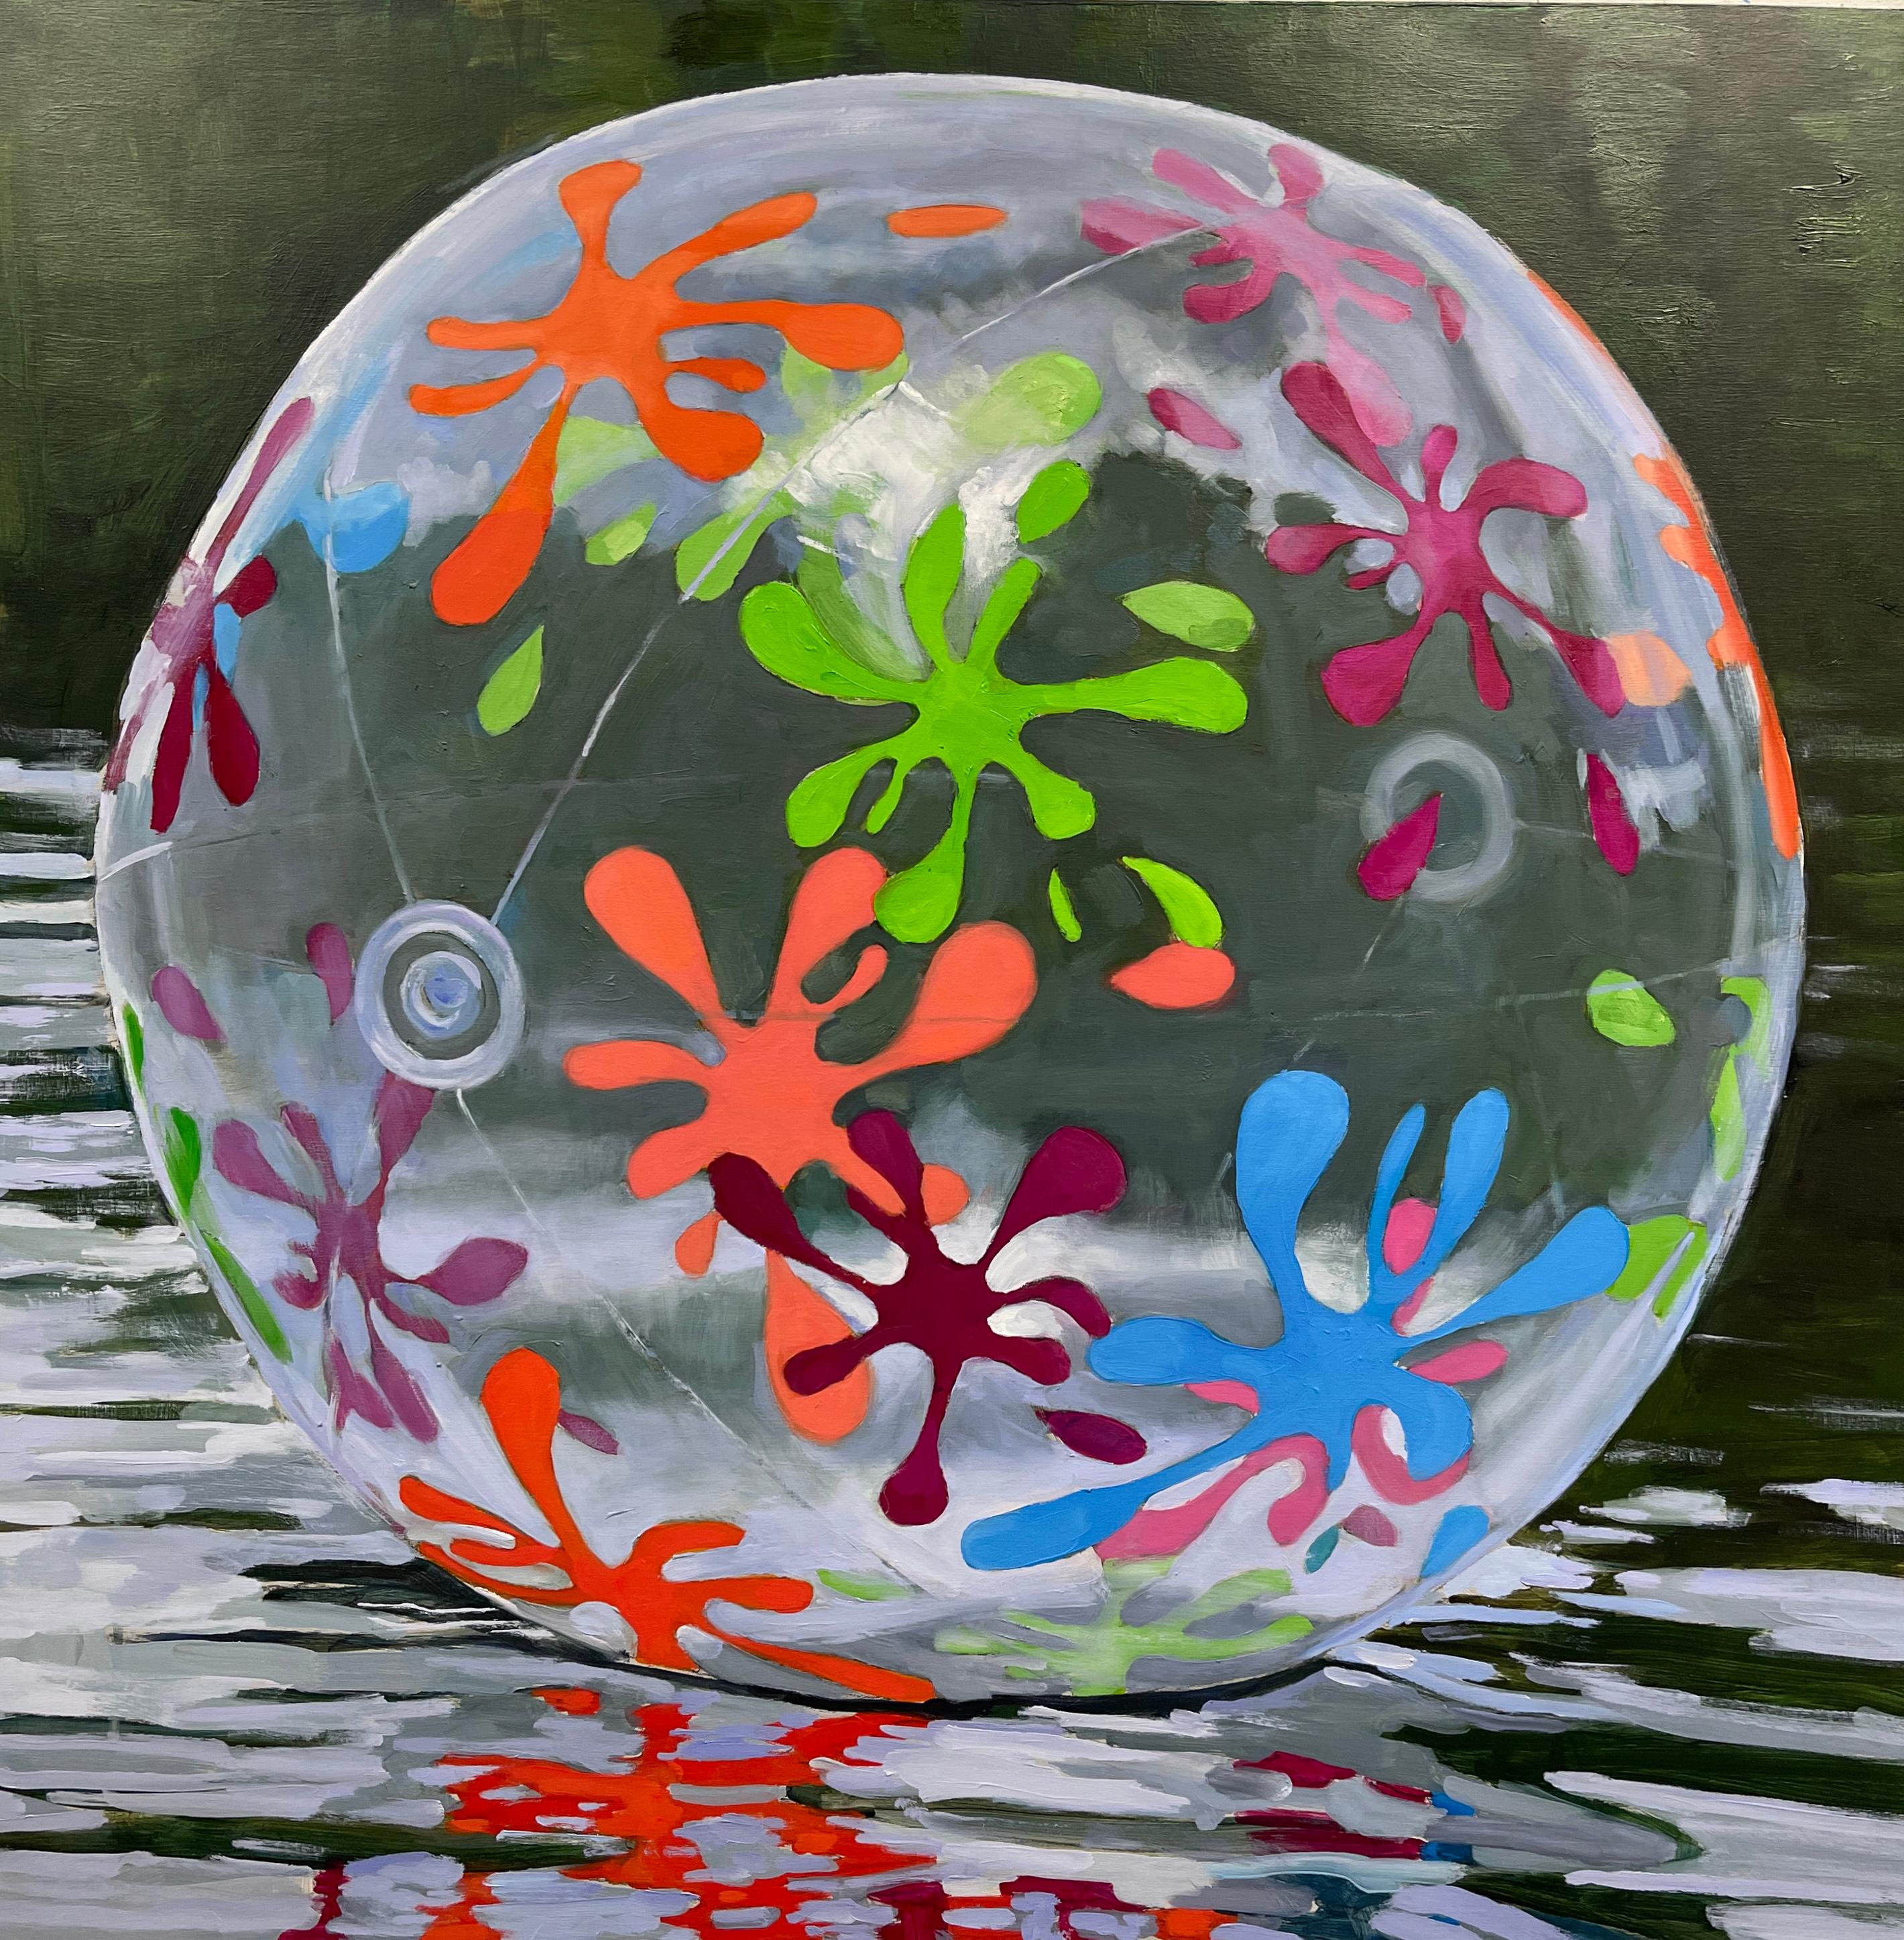 Carol O'Malia Still-Life Painting - "Green Echo" oil painting of clear beach ball with orange, green, pink splatter